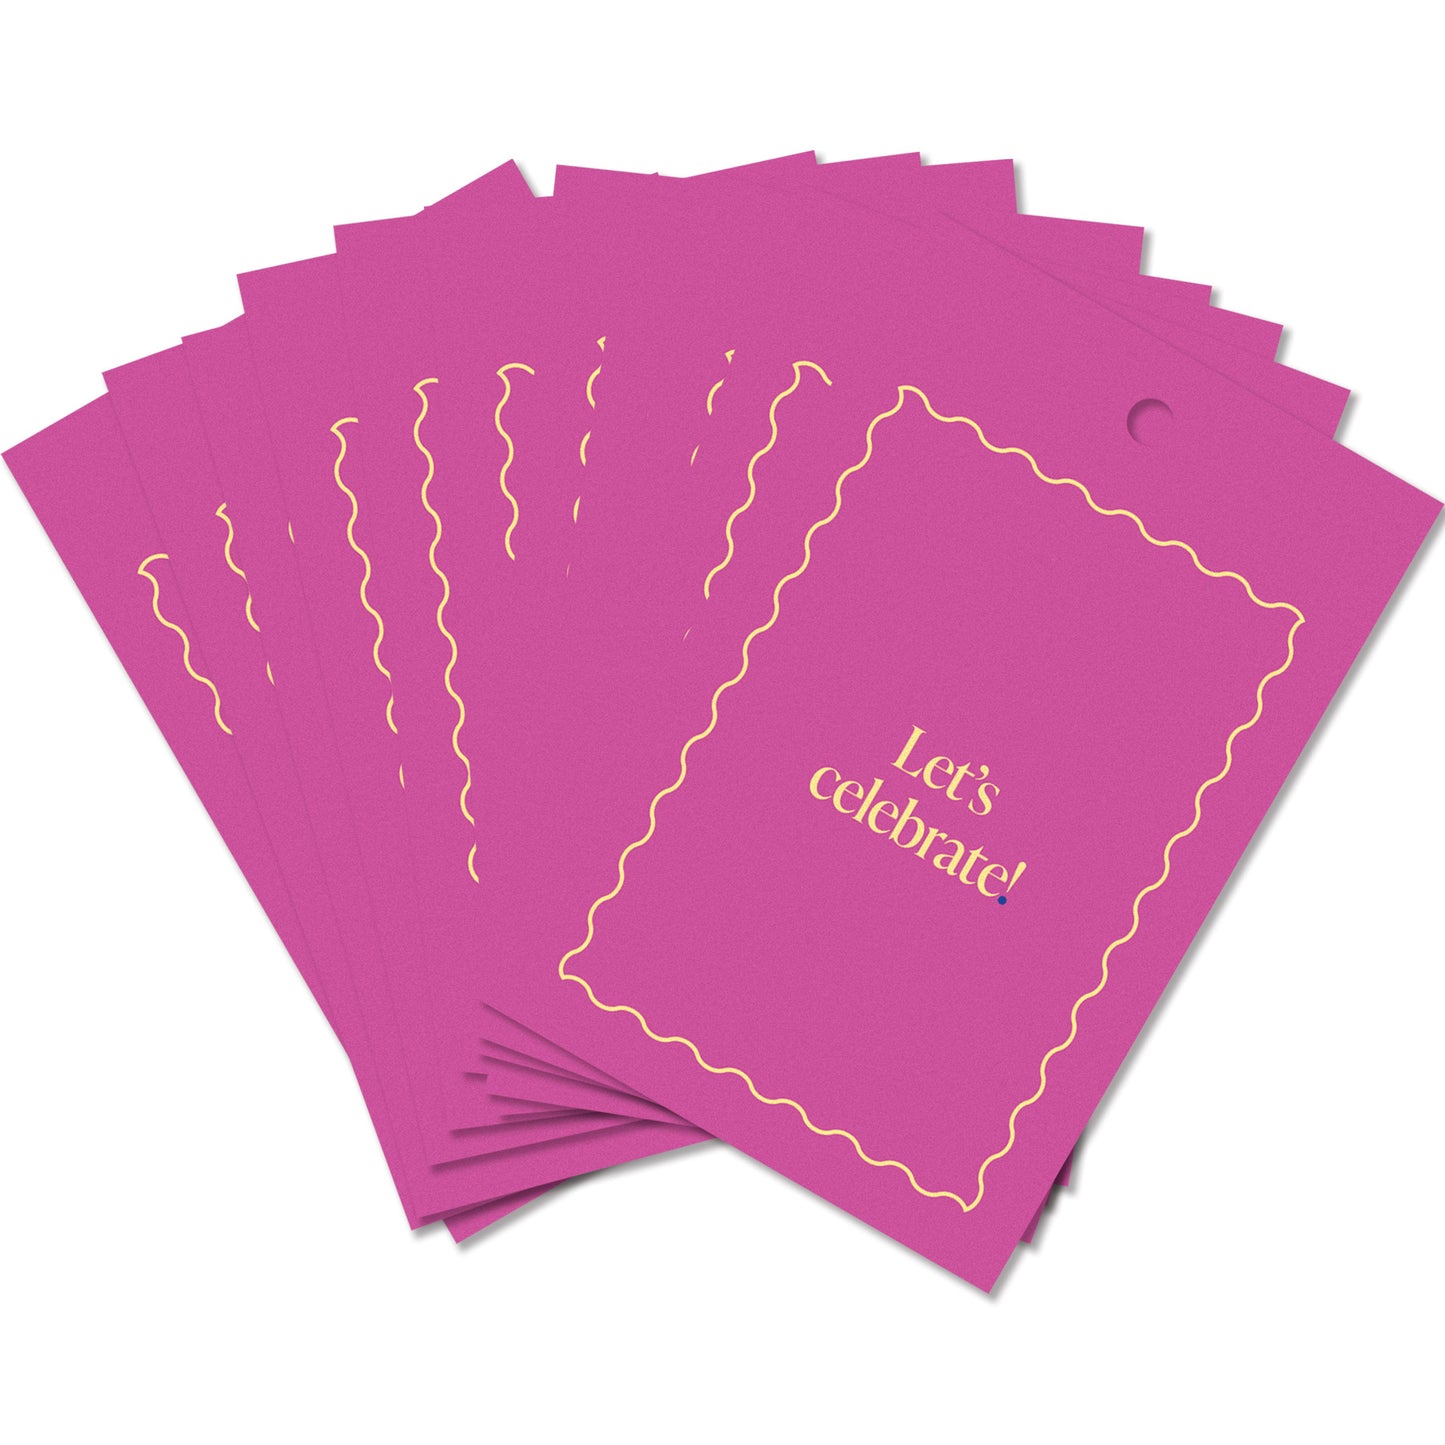 LET'S CELEBRATE! GIFT TAGS. (PACK OF 10)